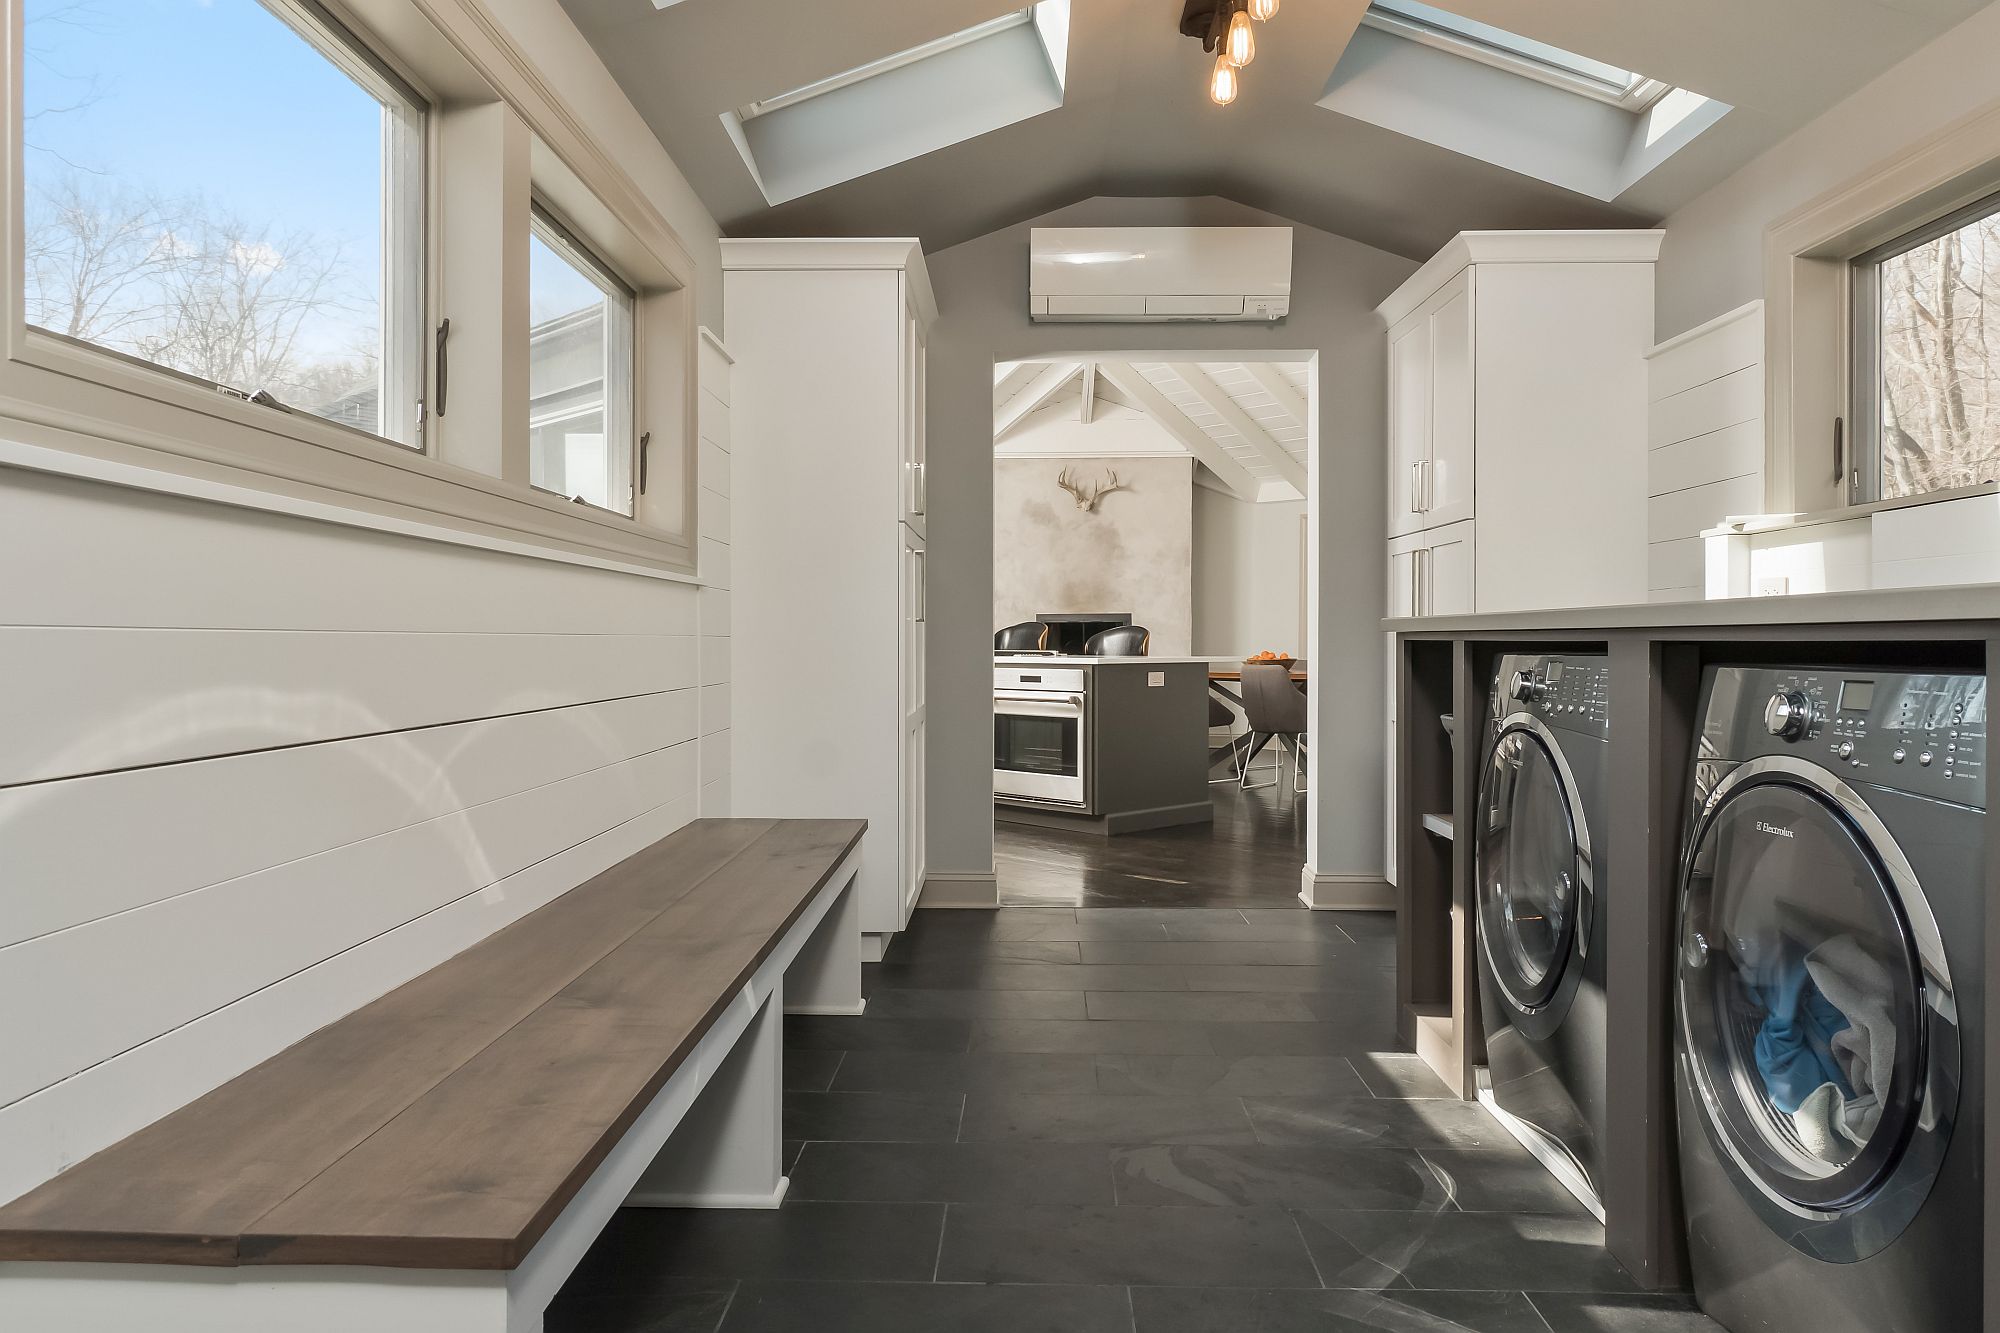 Combine the mud room and laundry area in style